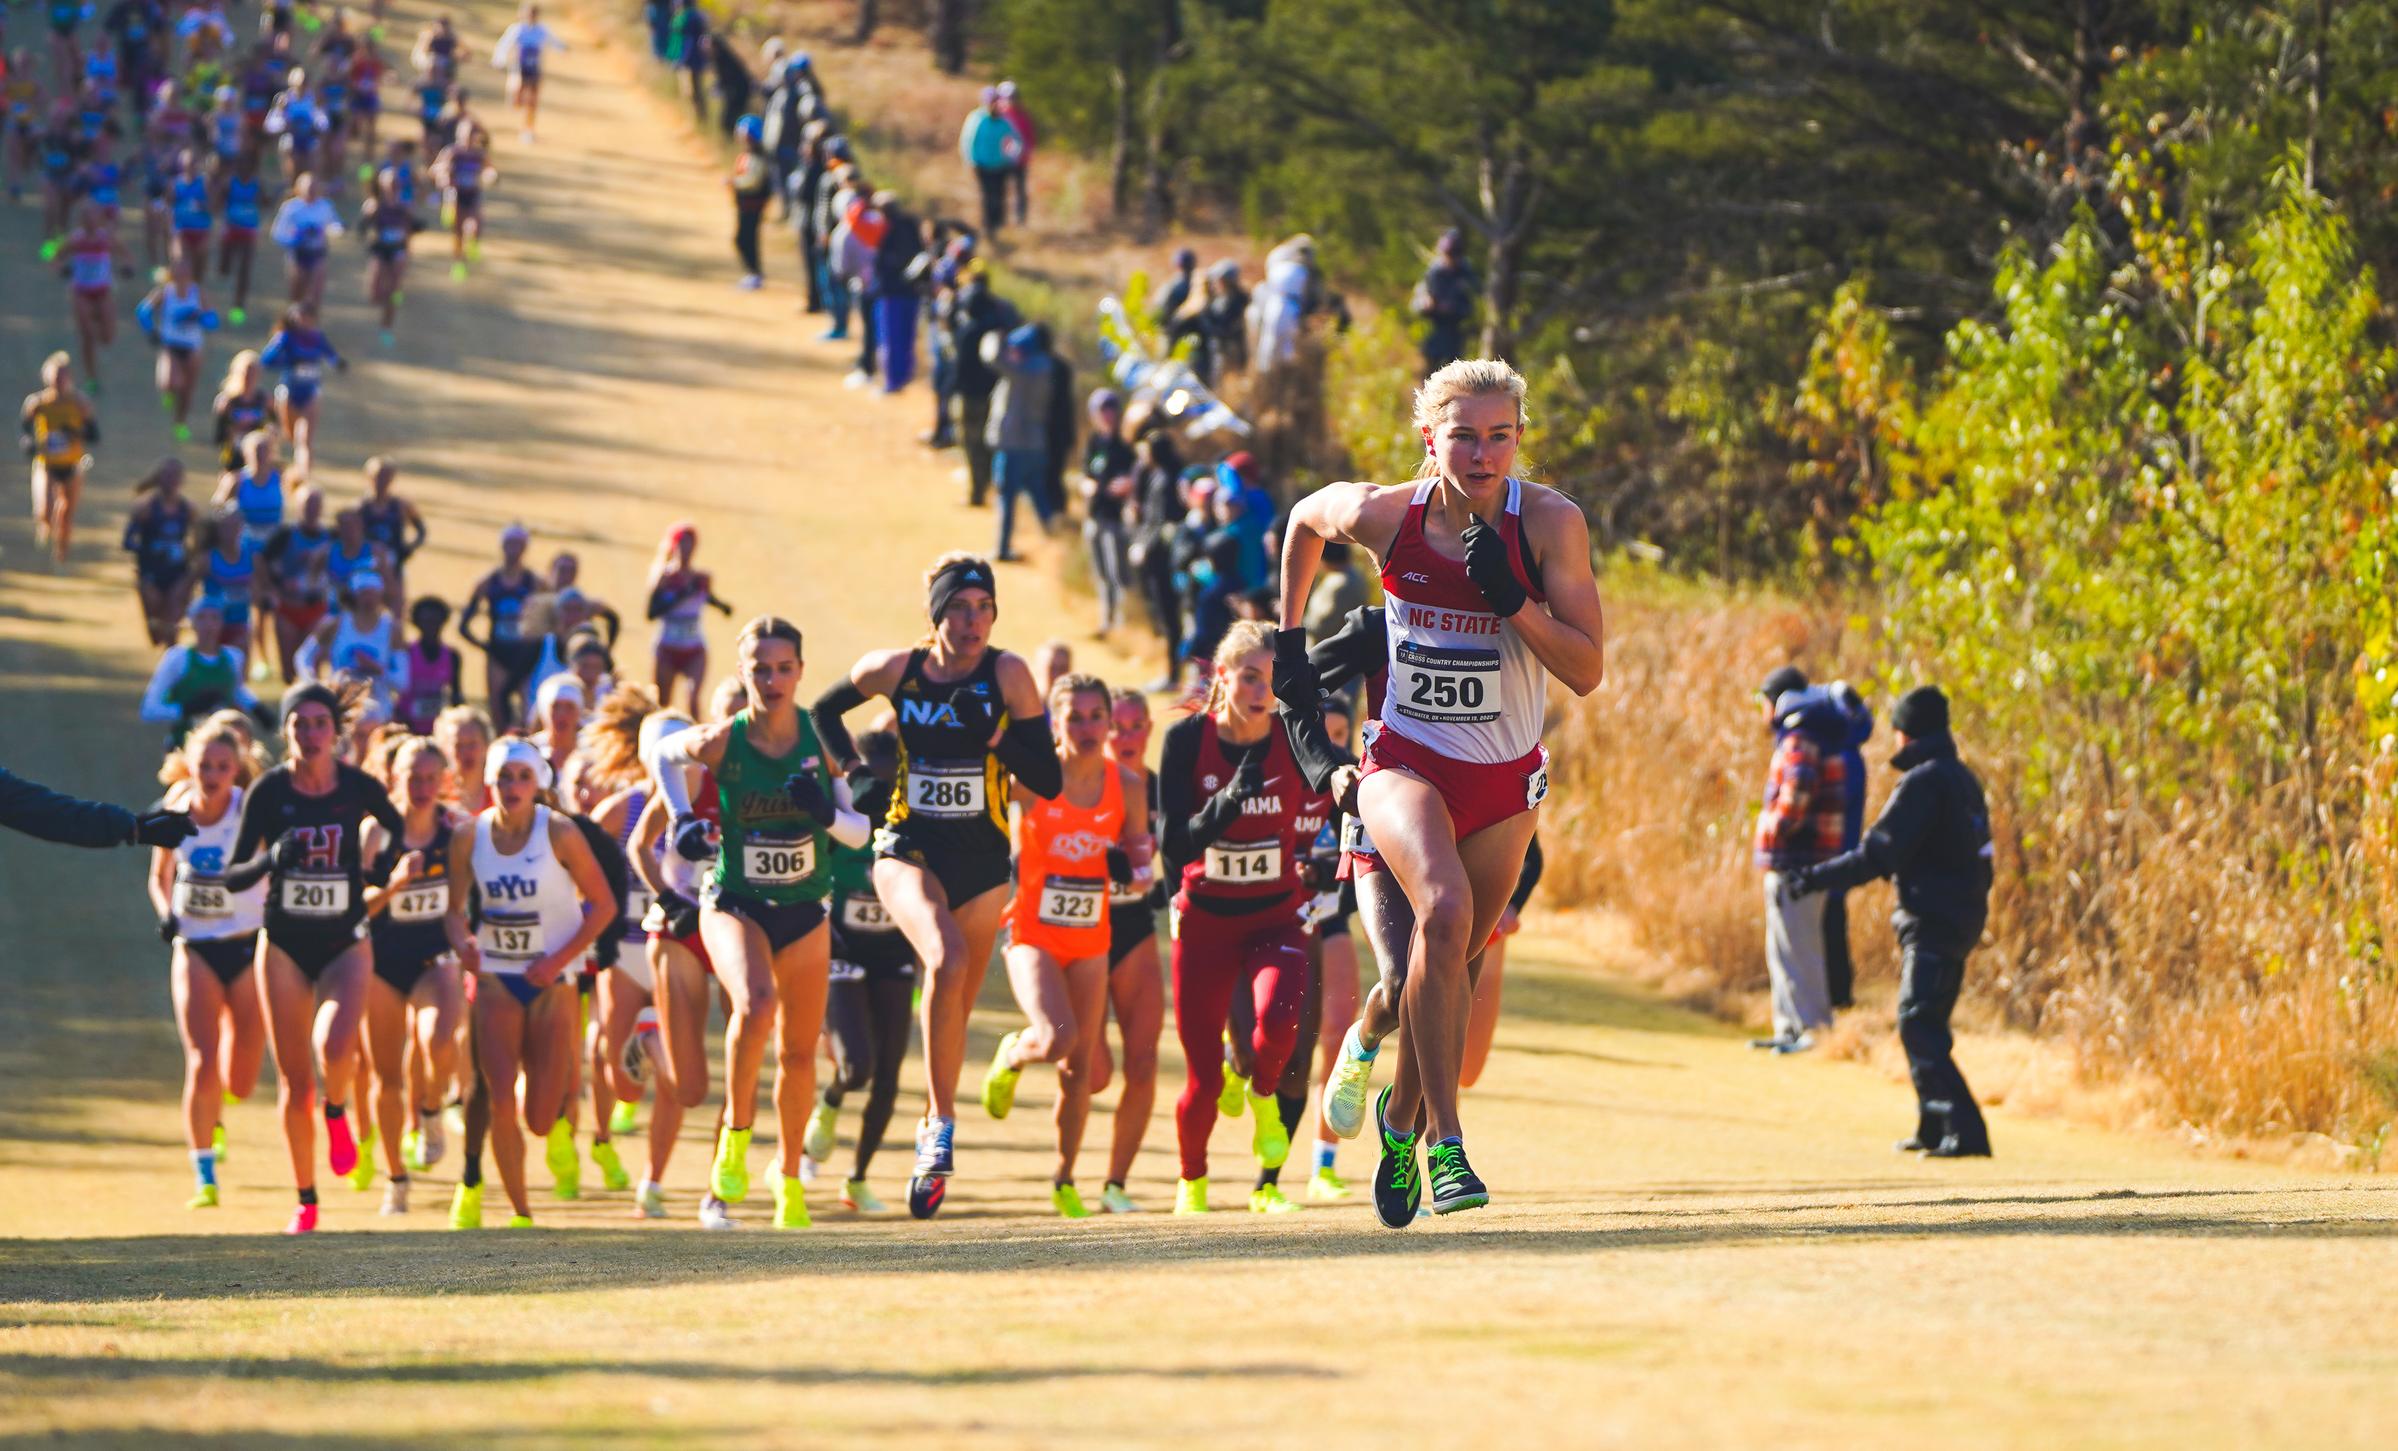 What To Watch At The 2023 NCAA Cross Country Championships: NAU’s Dynasty, Tuohy vs. Valby